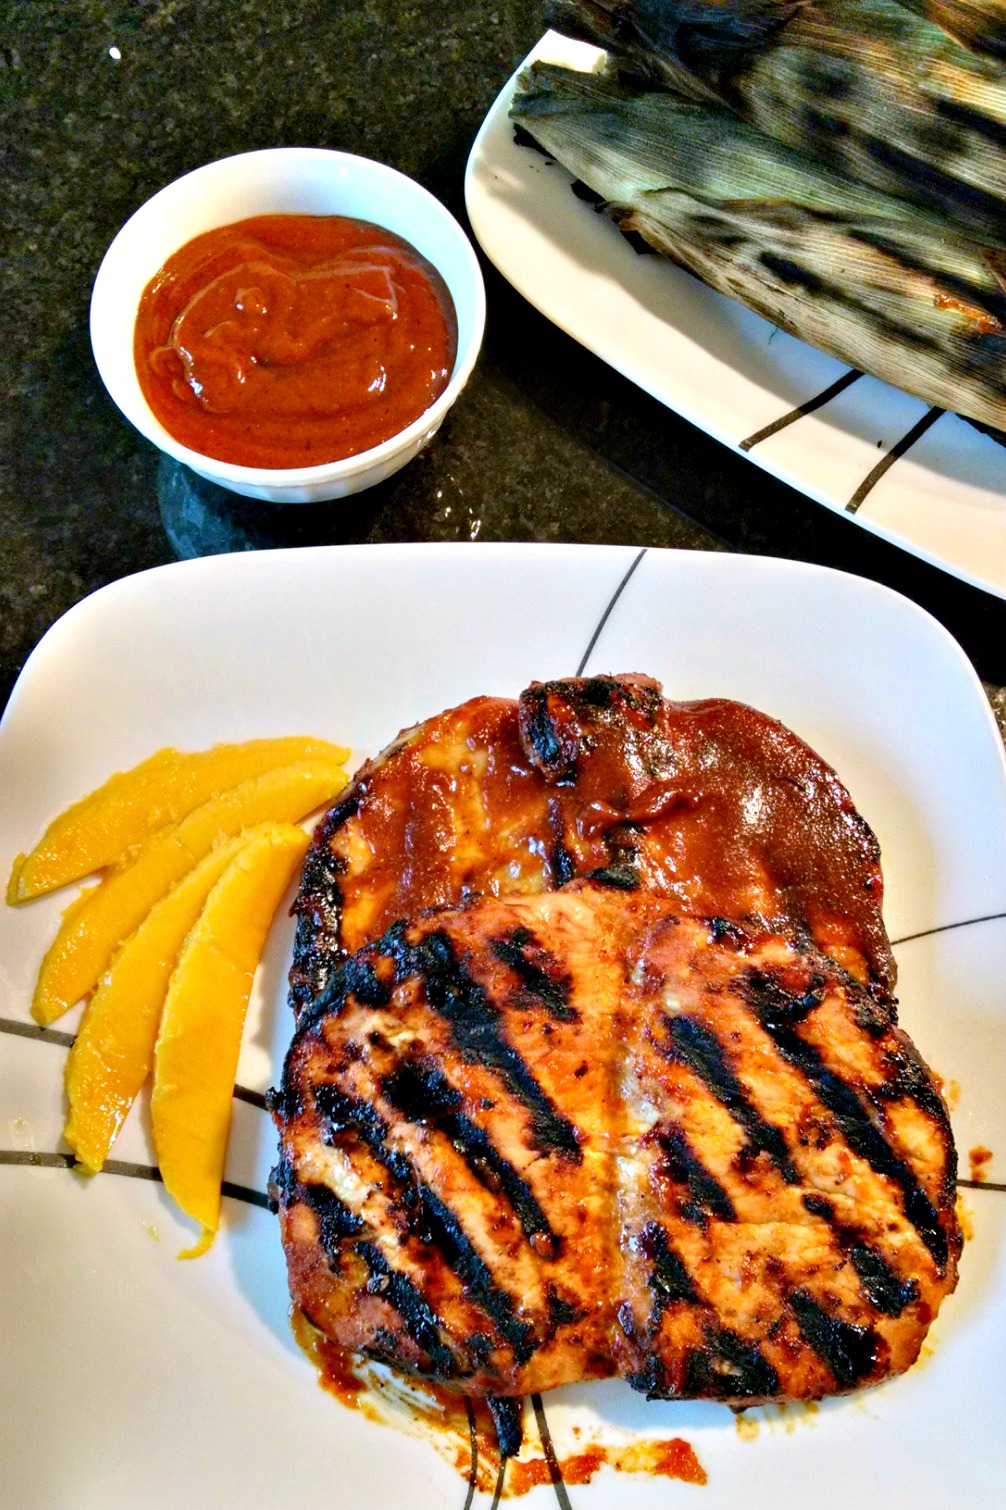 Exotically sweet mango is the basis for this simply tasty sauce. Mango Barbecued Pork Chops takes you to the tropics right from your kitchen. This recipe makes plenty of sauce for at least 2 meals work of chops.